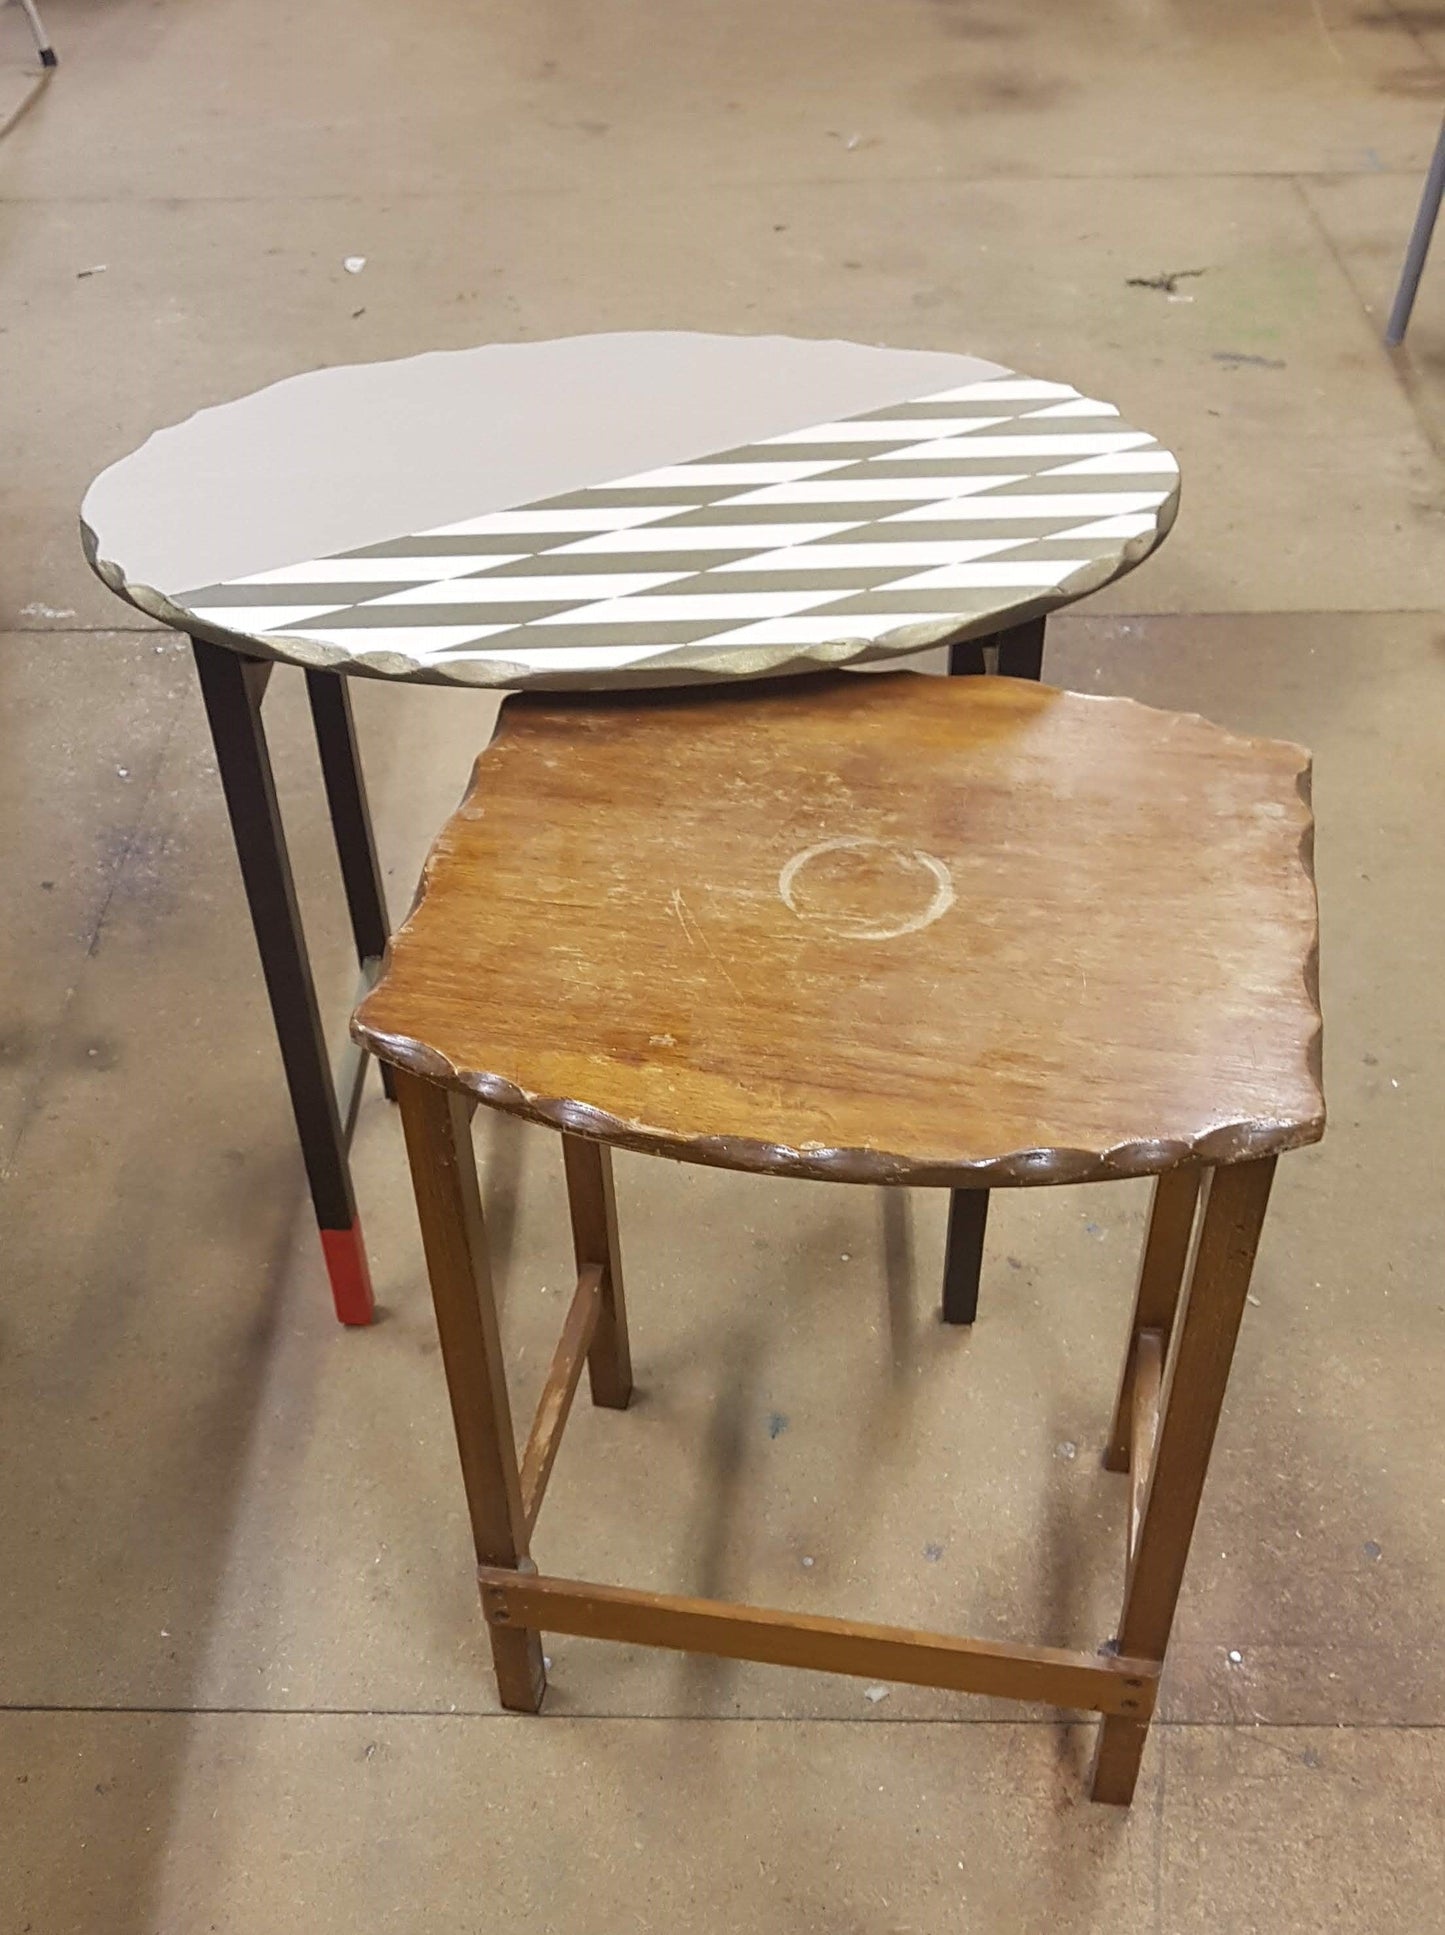 ONE DAY WORKSHOP: Learn Furniture Upcycling & Design - Dates available